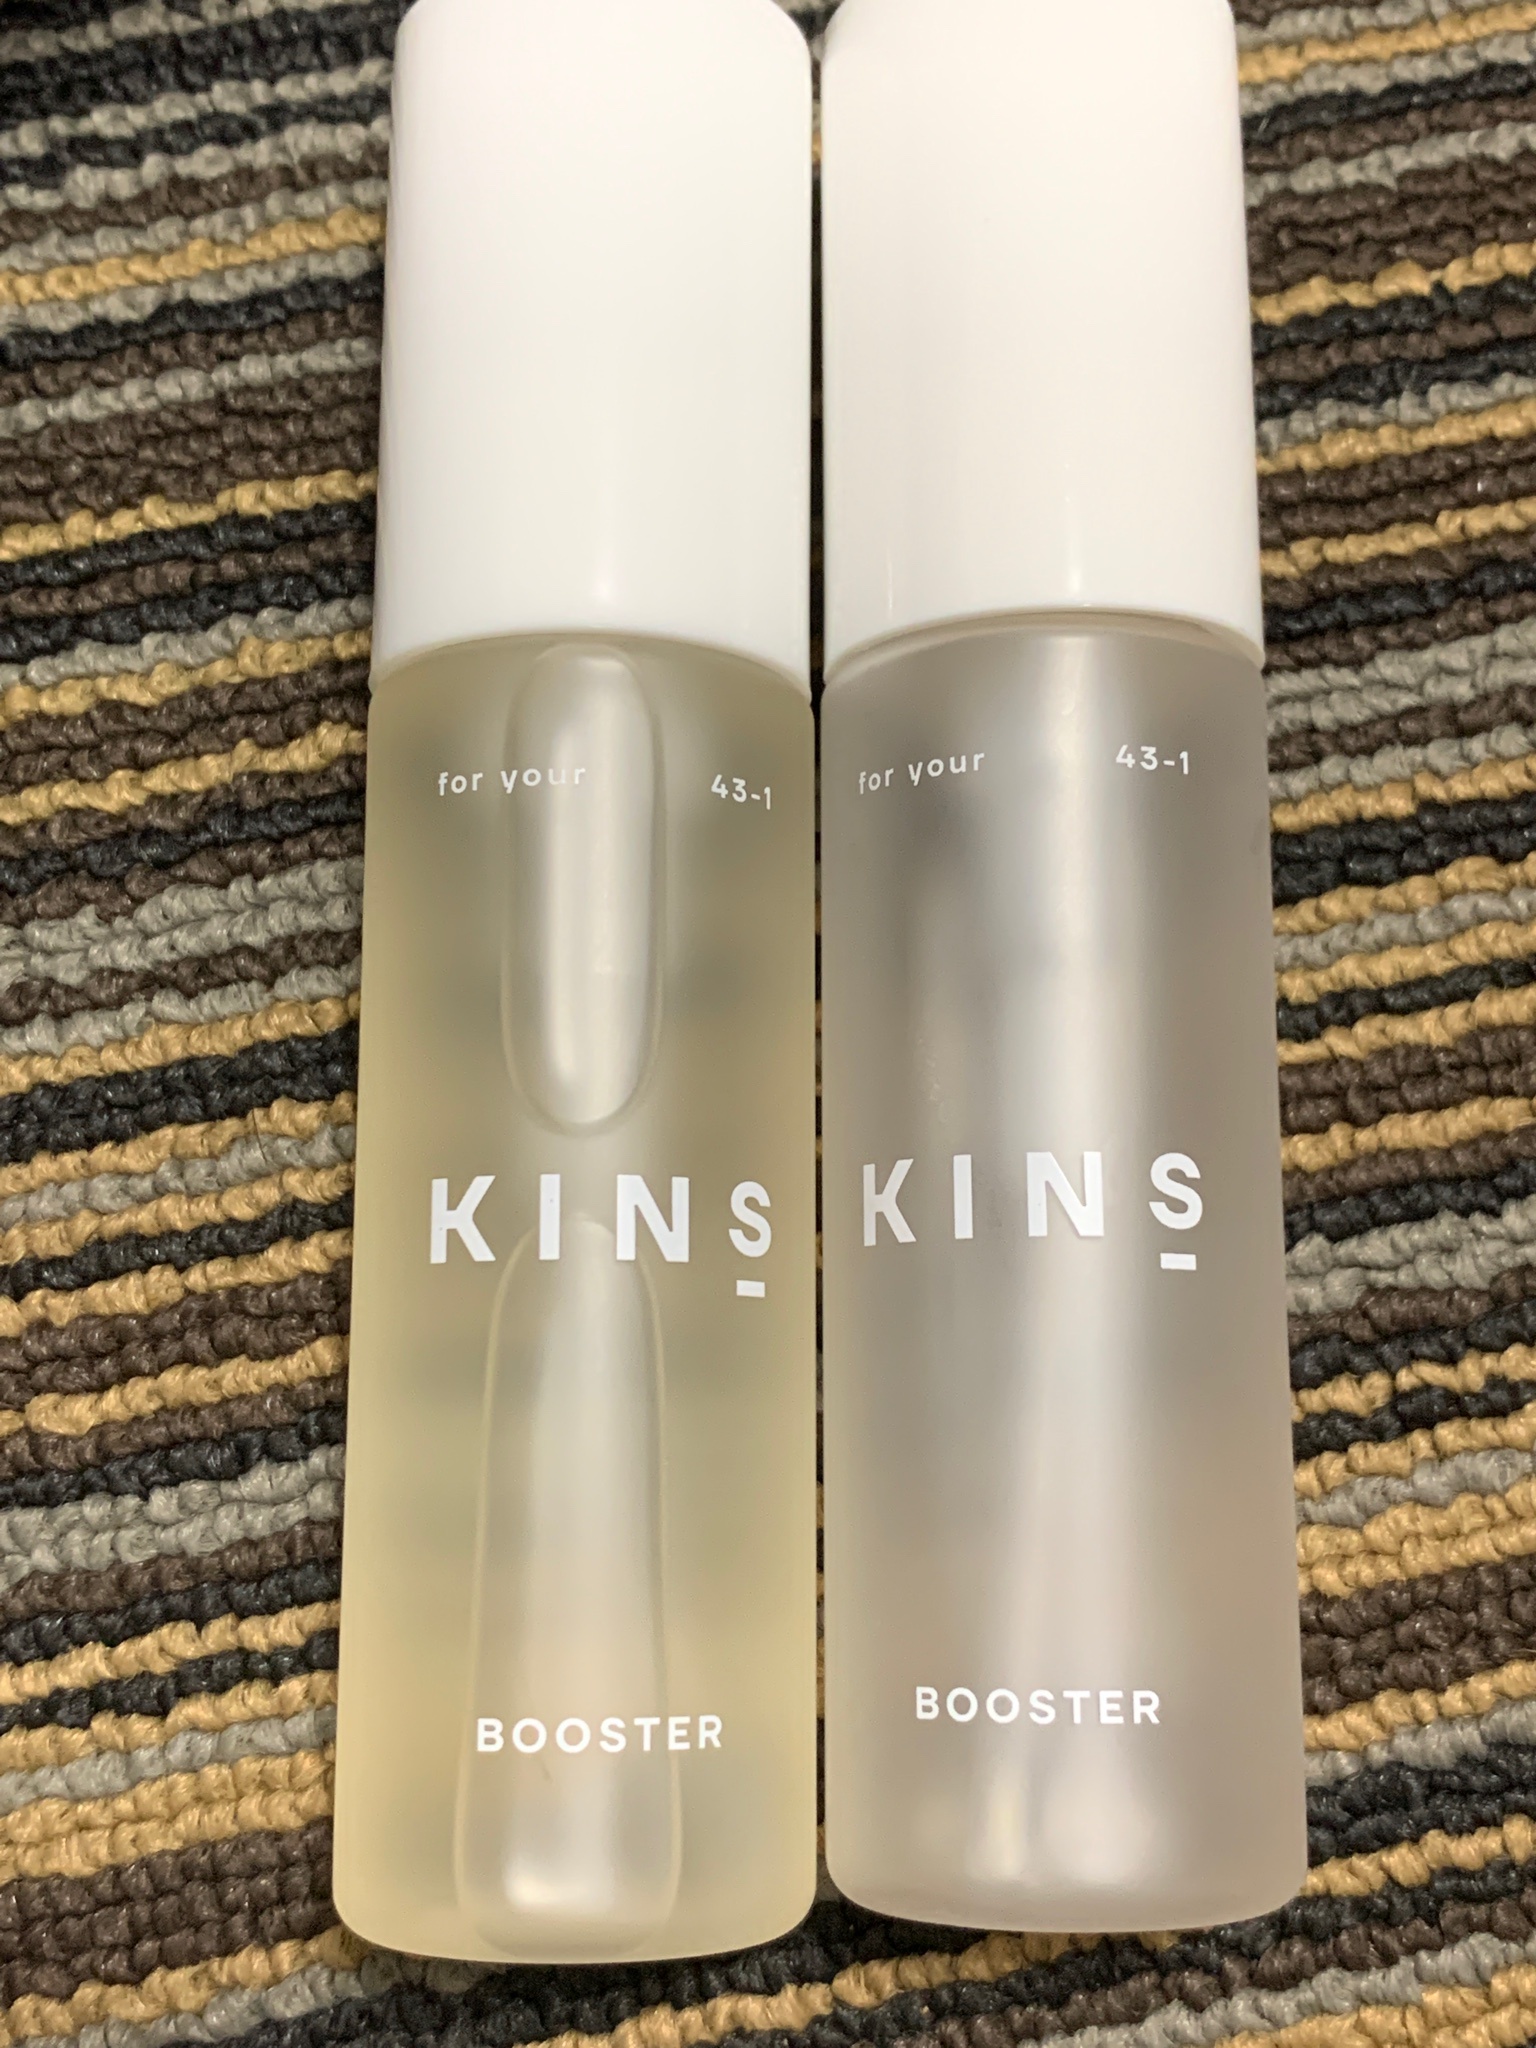 KINS / BOOSTERの公式商品情報｜美容・化粧品情報はアットコスメ